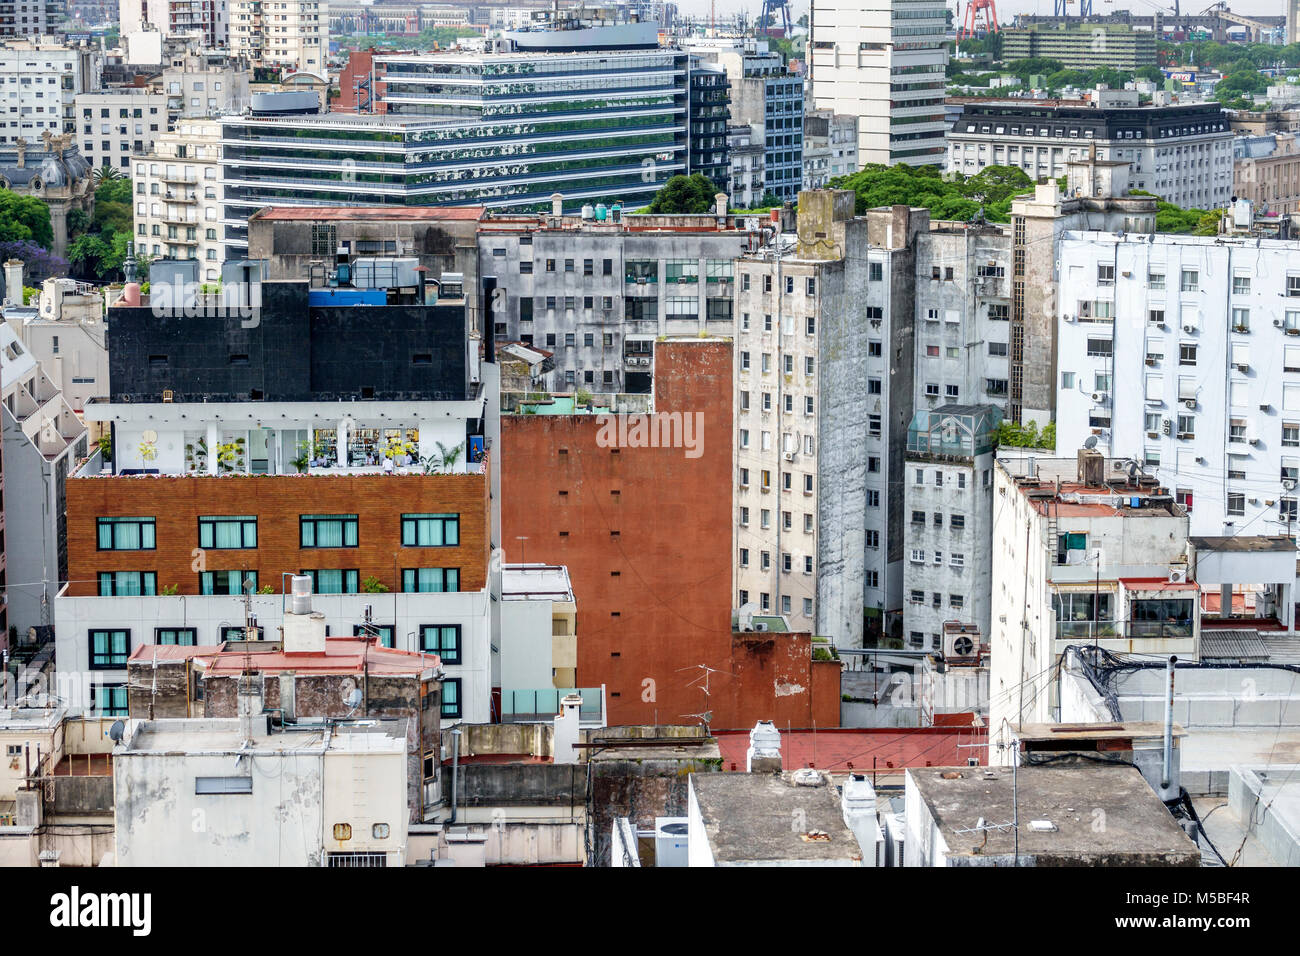 Buenos Aires Argentina,Monserrat,city skyline,residential apartment buildings,rooftops,overhead view,ARG171125202 Stock Photo